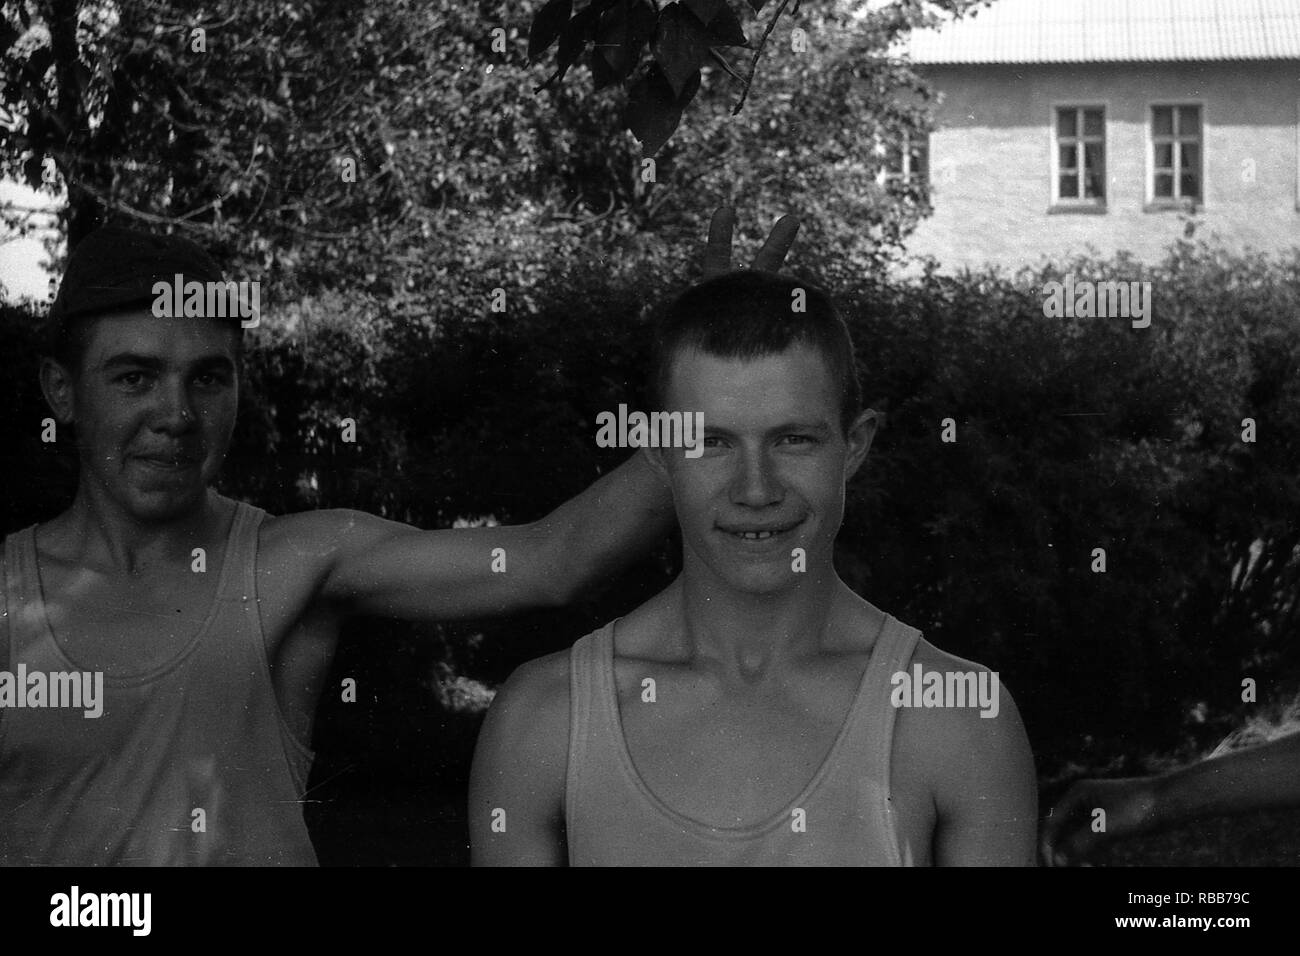 MOSCOW REGION, RUSSIA - CIRCA 1992: Portrait of soldiers of the Russian army in a sleeveless shirt. Film scan. Large grain. Stock Photo